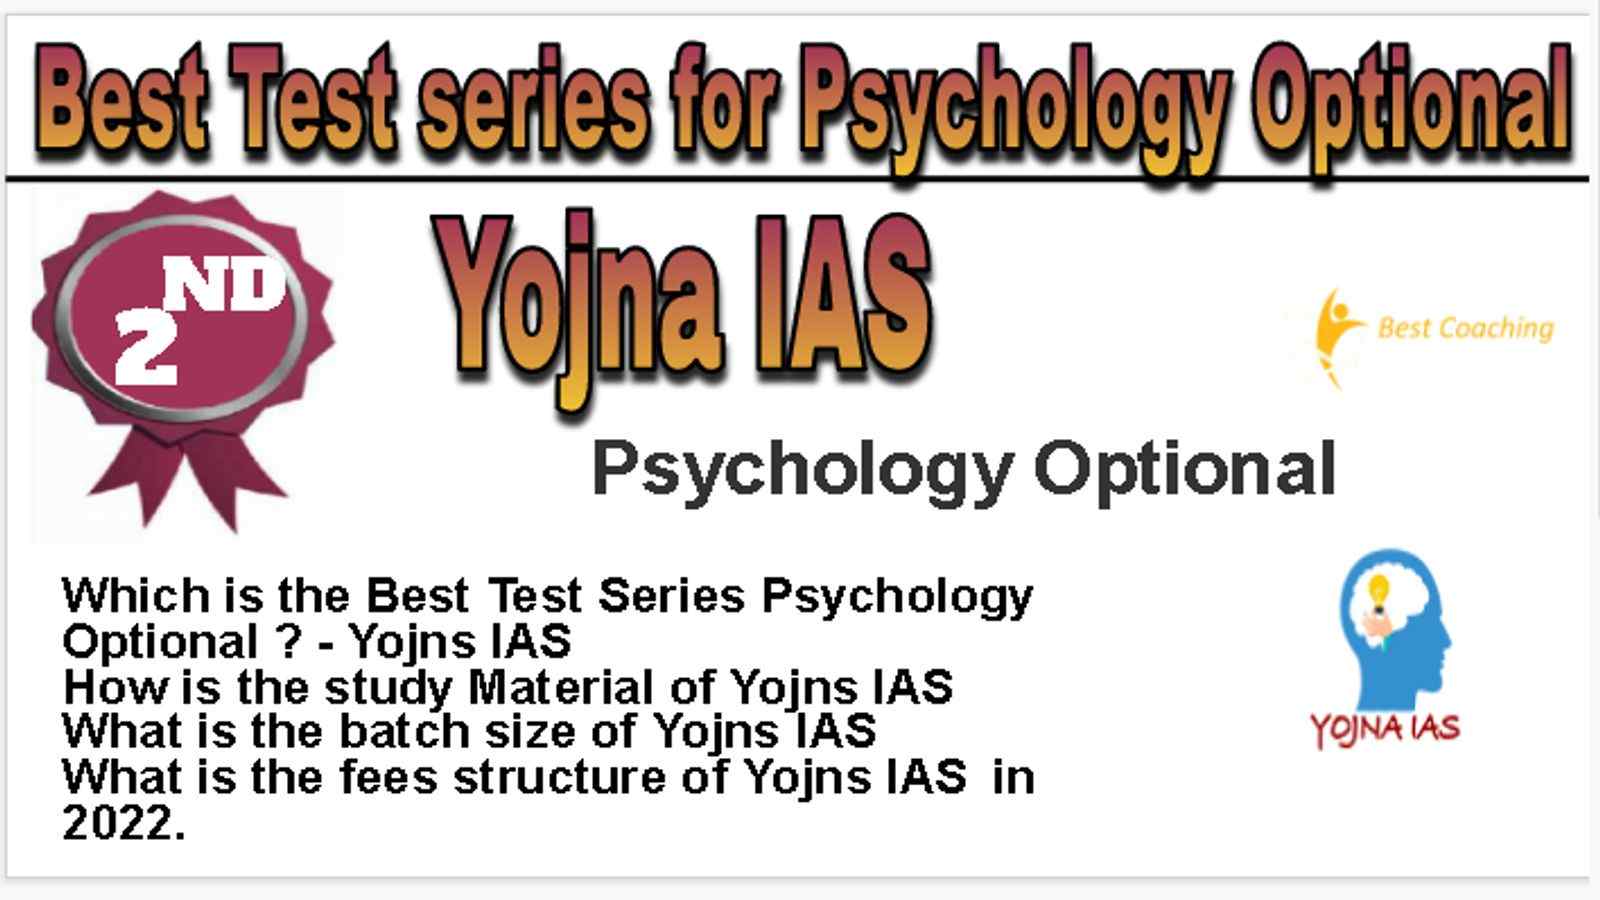 Rank 2 Best Test series for Psychology Optional